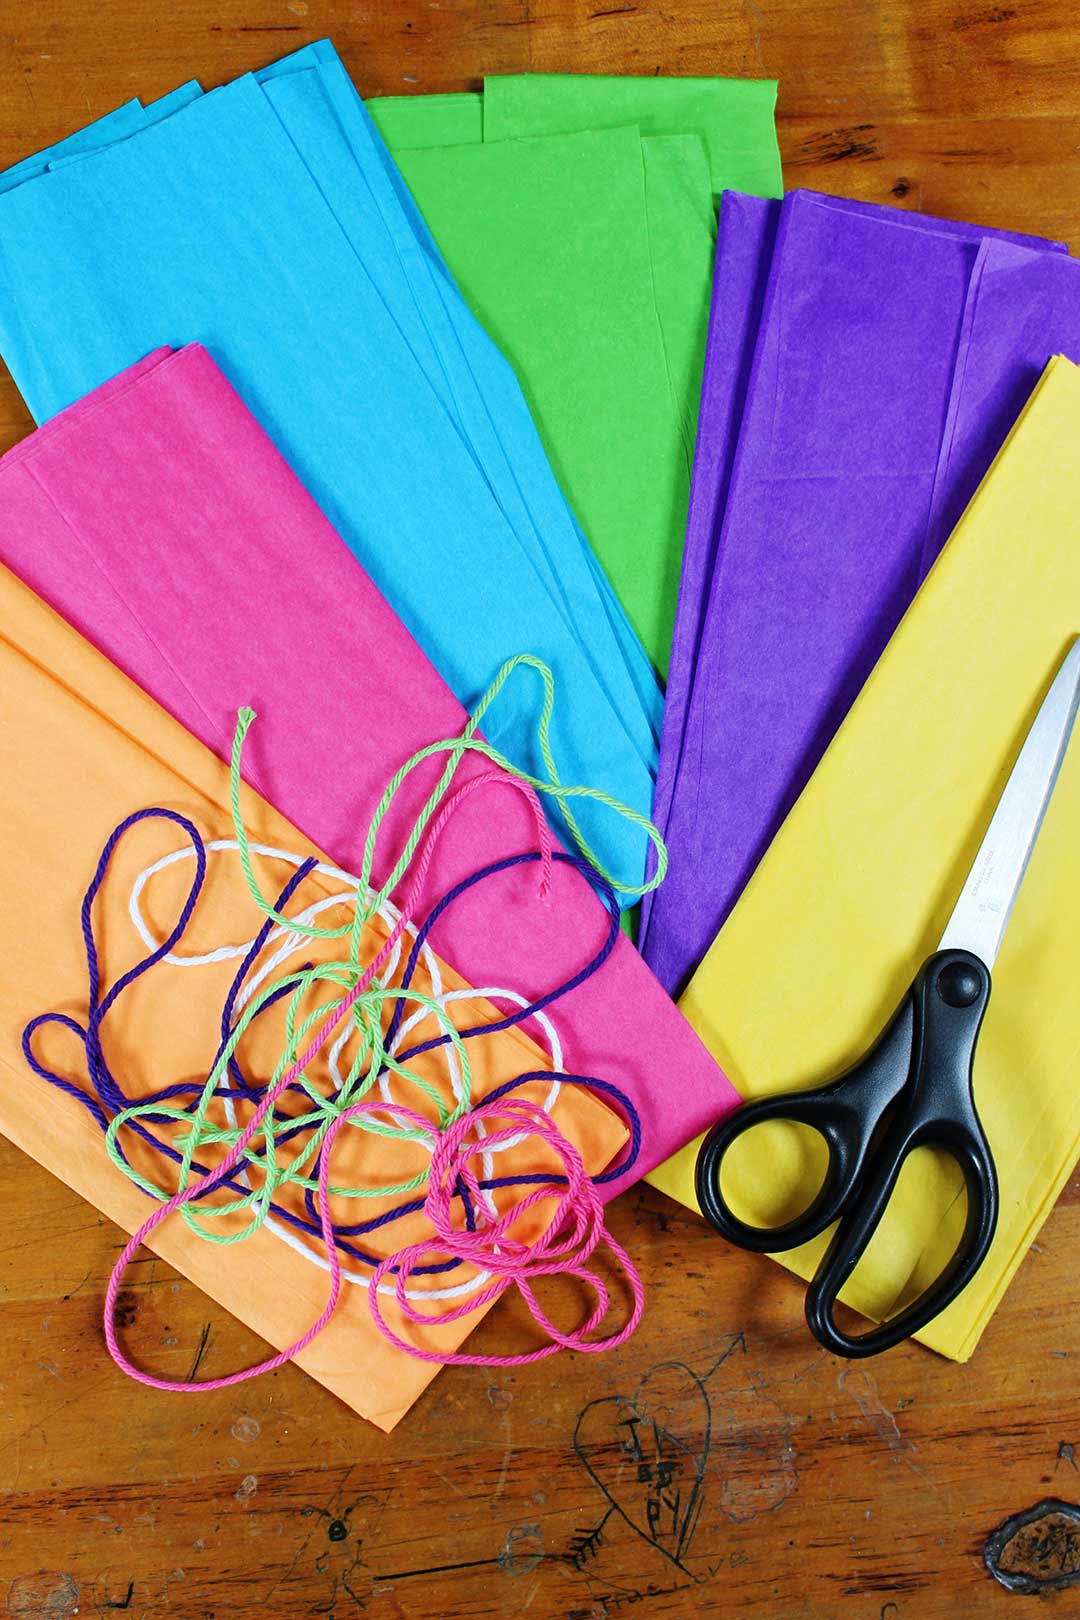 Stacks of orange, pink, blue, green, purple and yellow tissue paper with yarn and scissors resting on them.